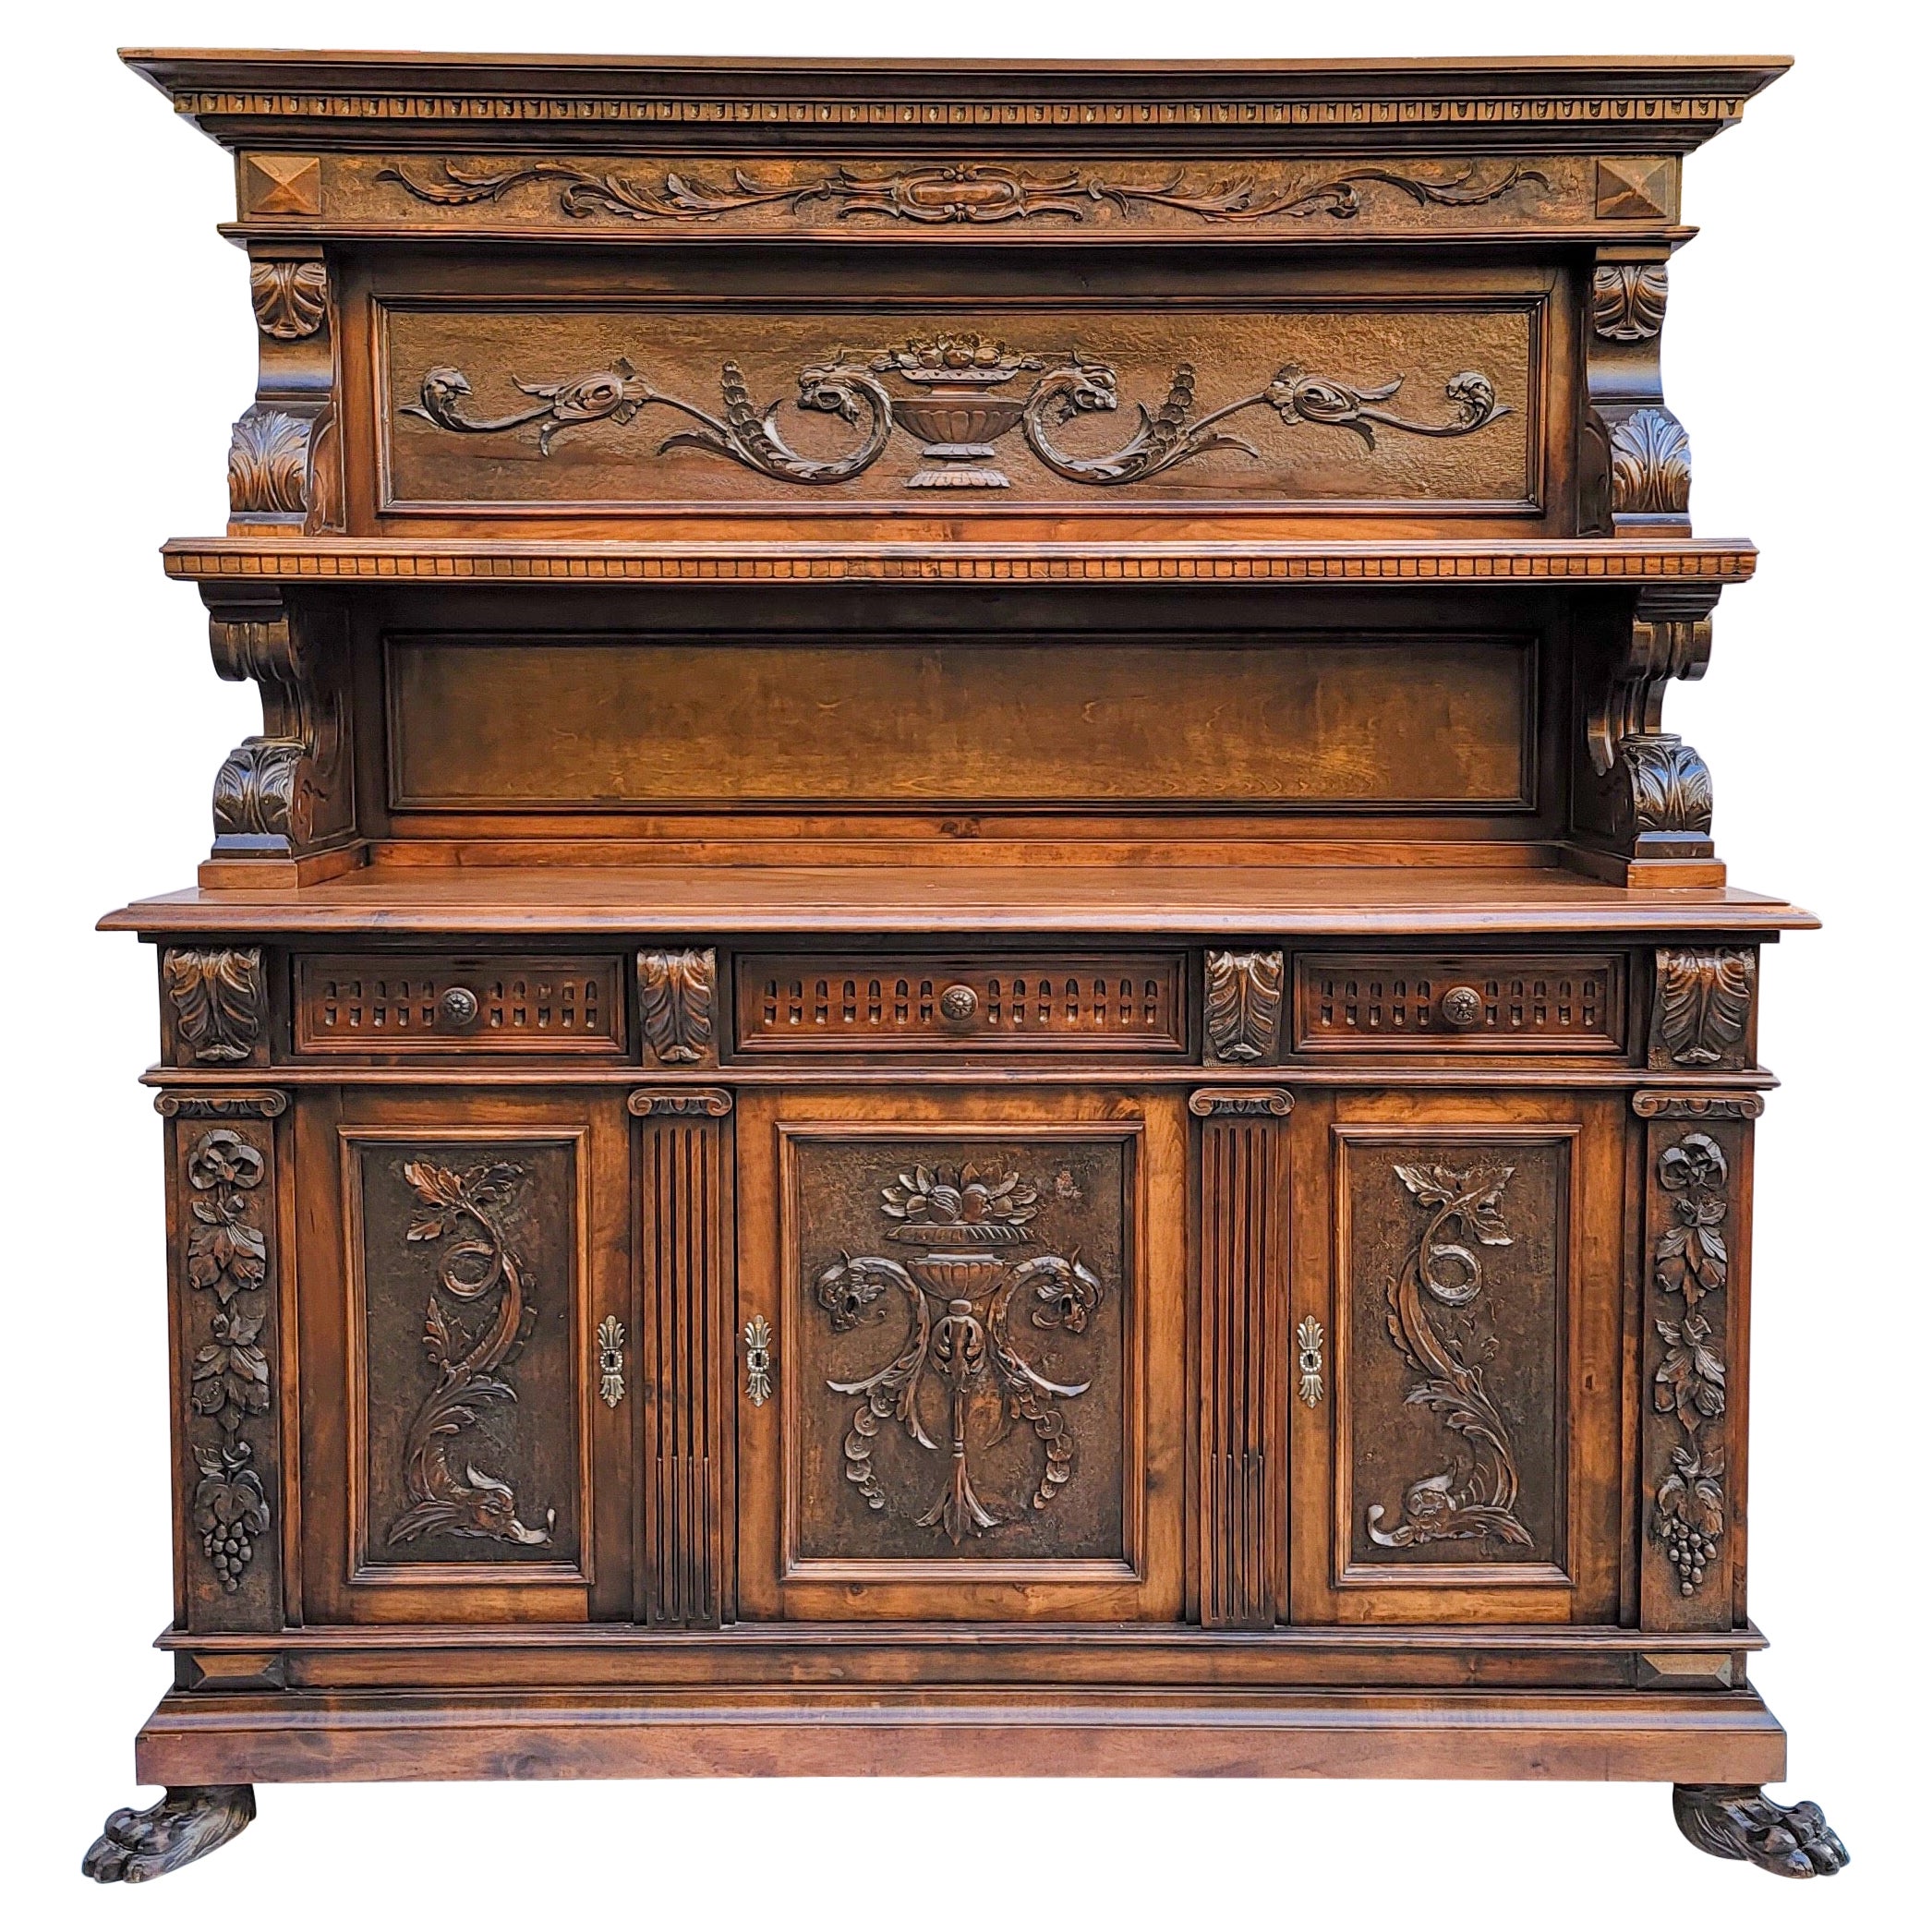 Neo-Classical Revival Carved Walnut Italian Cabinet / Cupboard, c. 1880